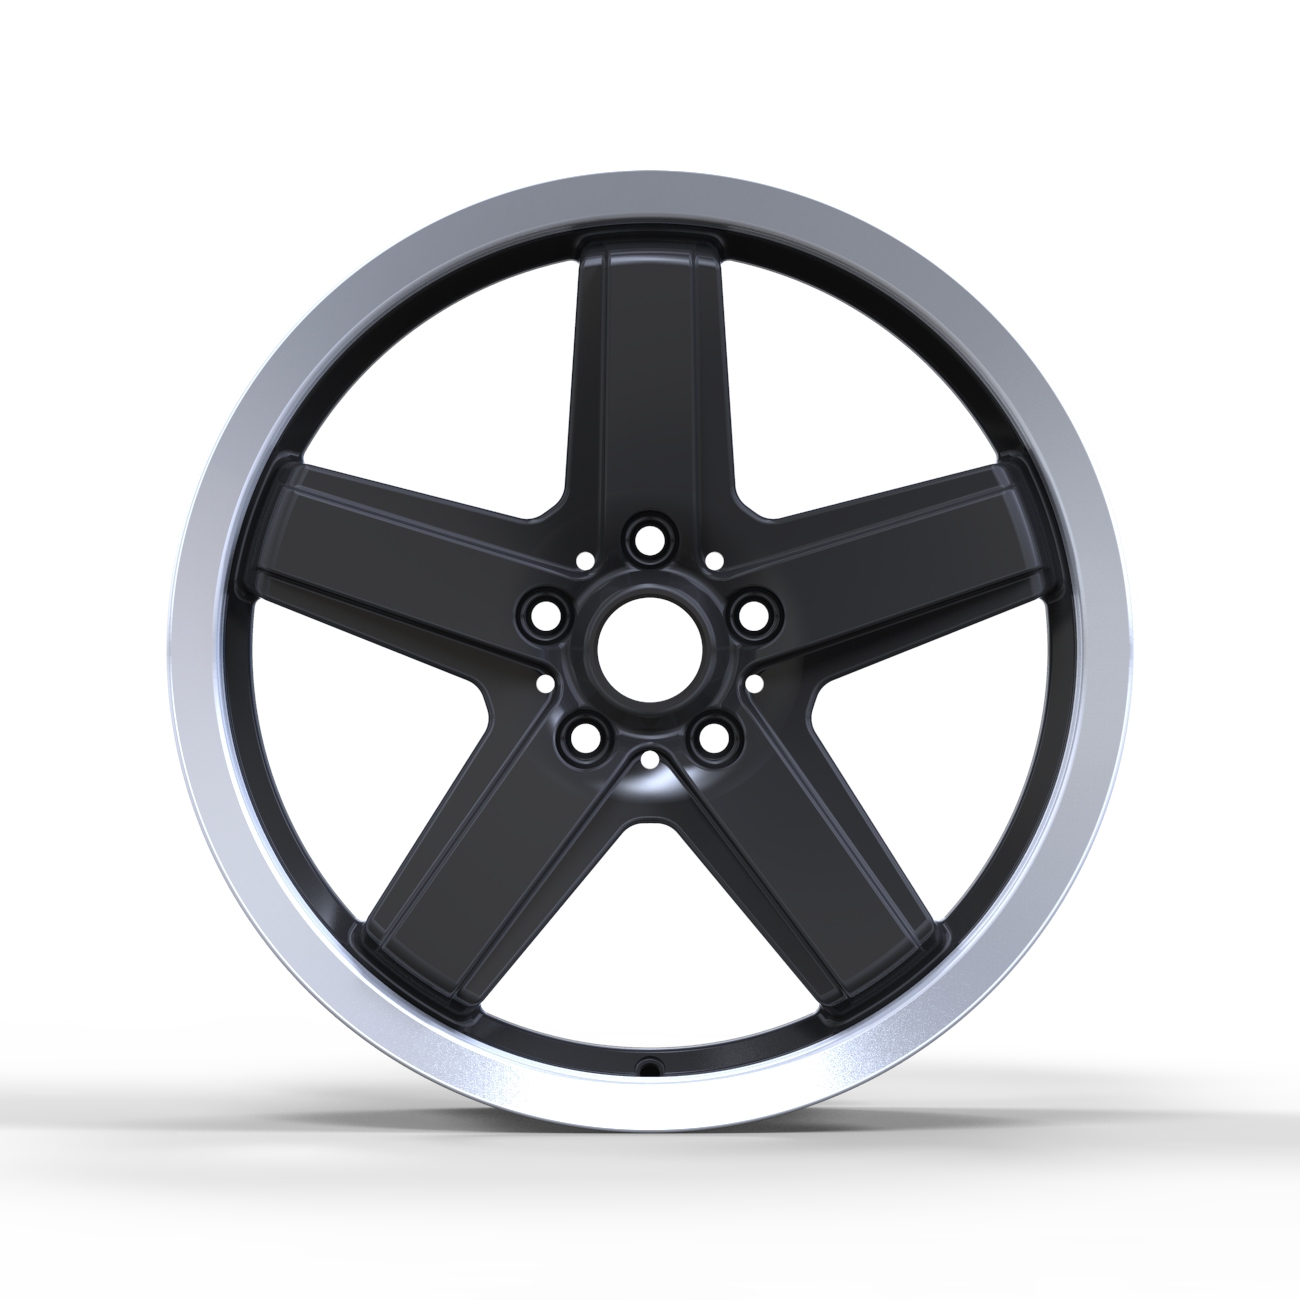 Custom High Performance Forged Aluminum Alloy Wheels Featured Image